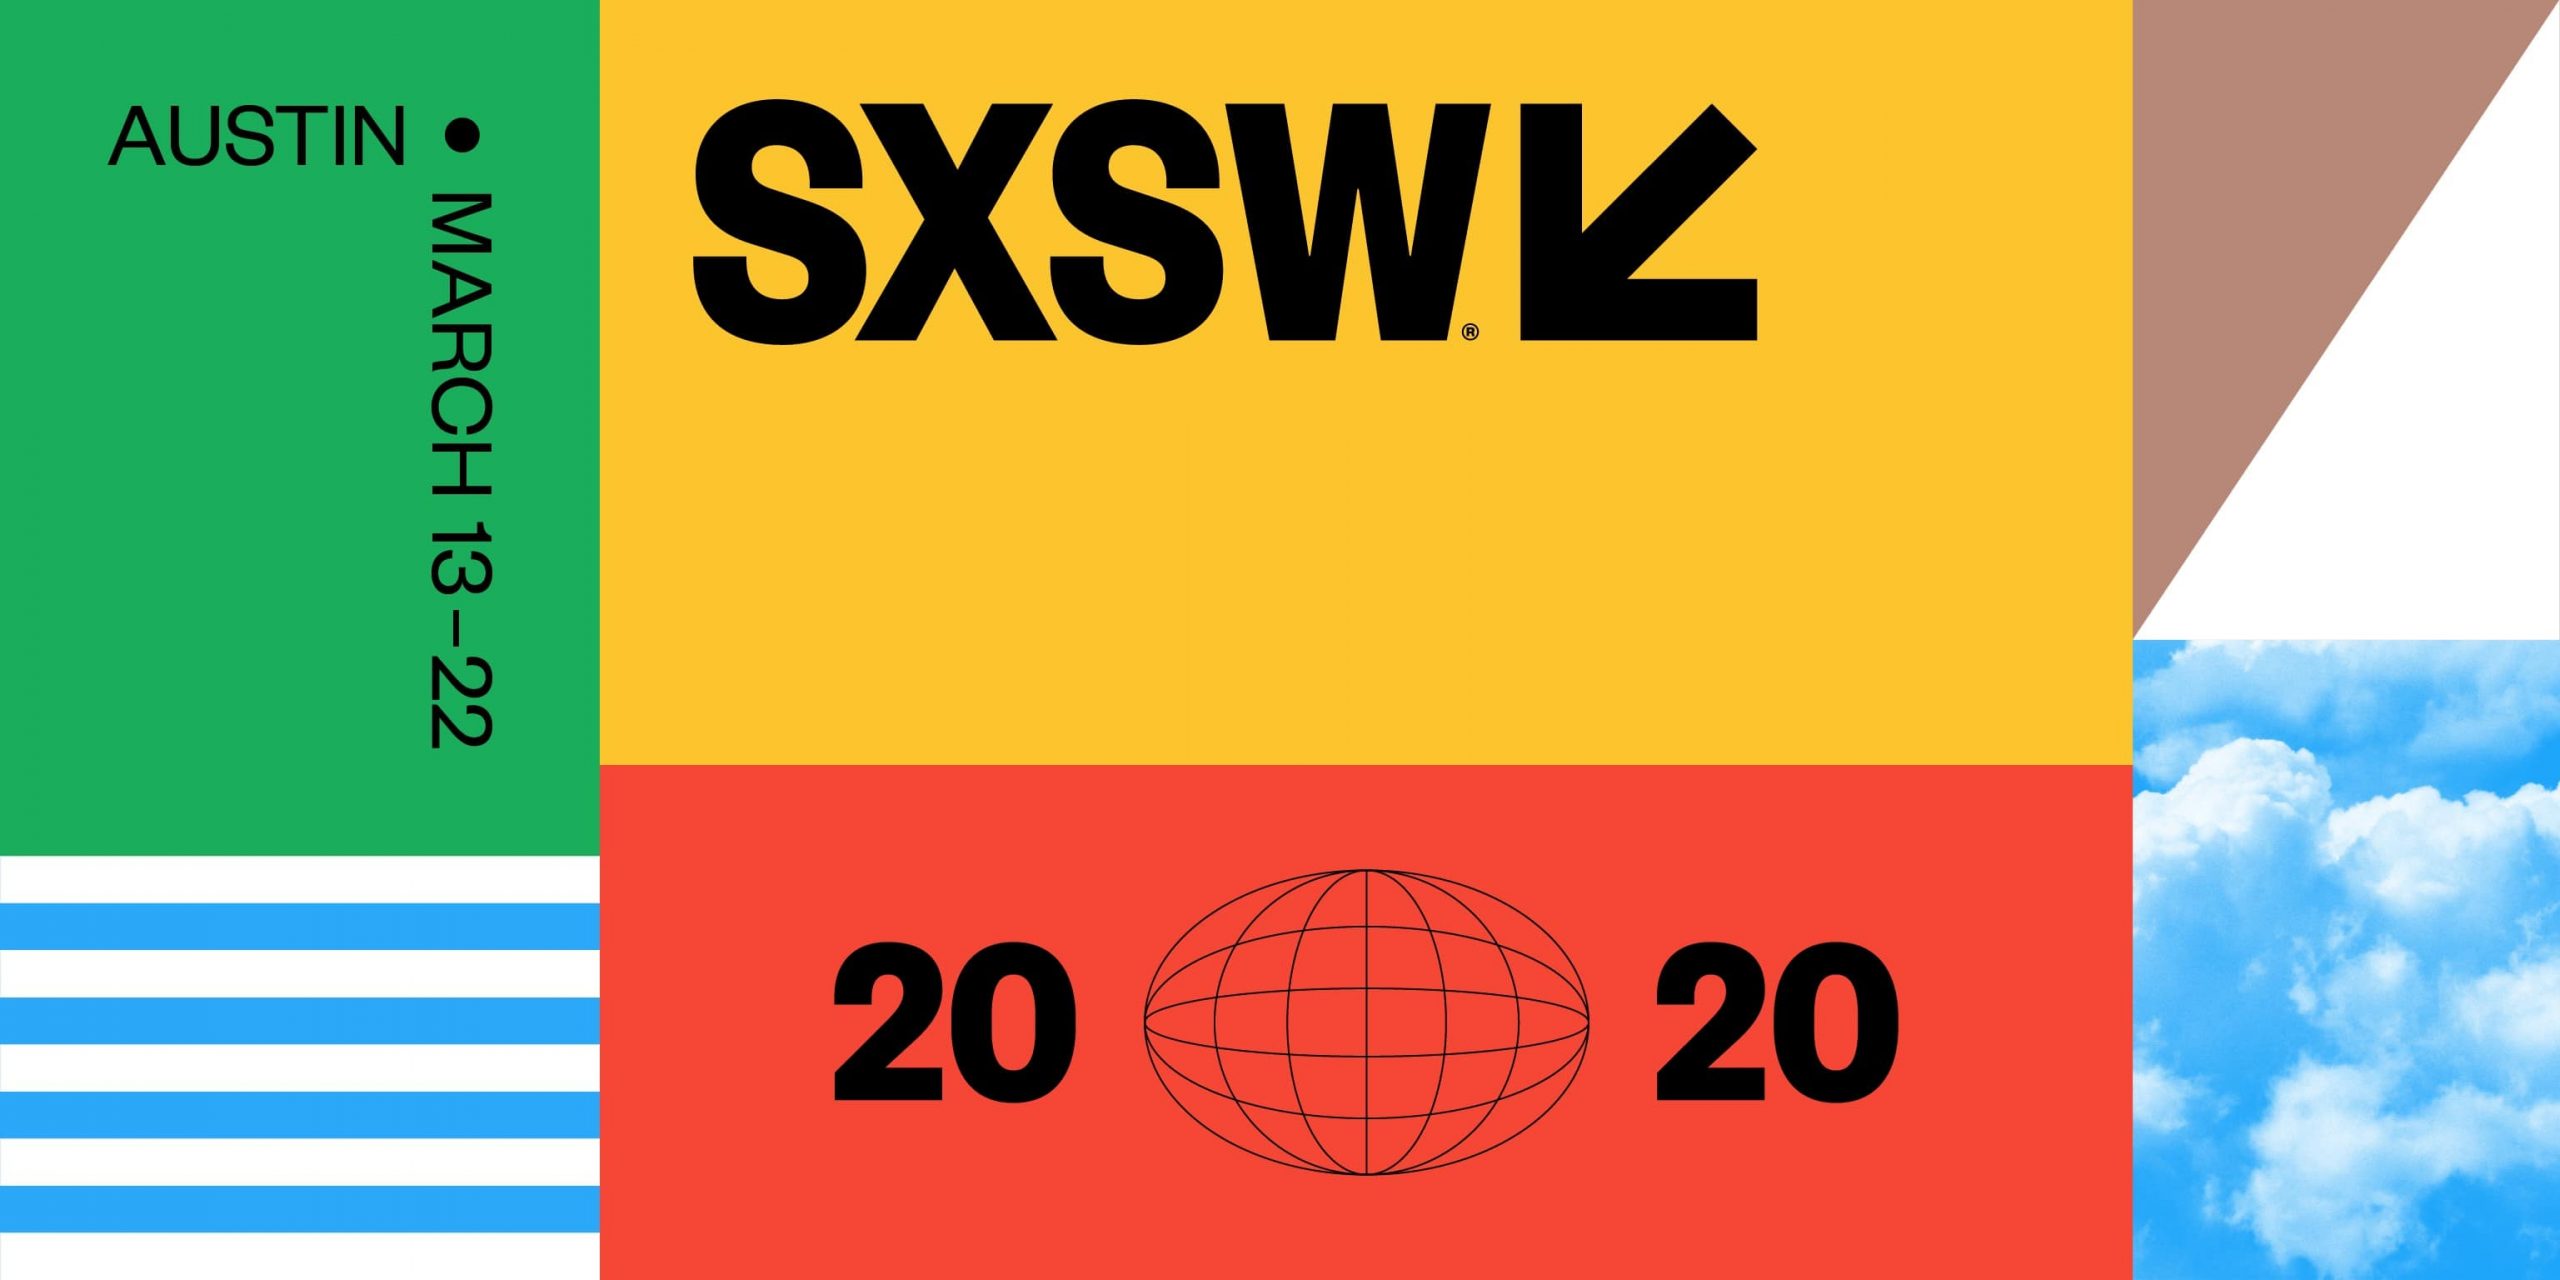 SXSW 2020 Provides Unique Experience And Value To New Music, Cannabis, and CBD Entrepreneurs